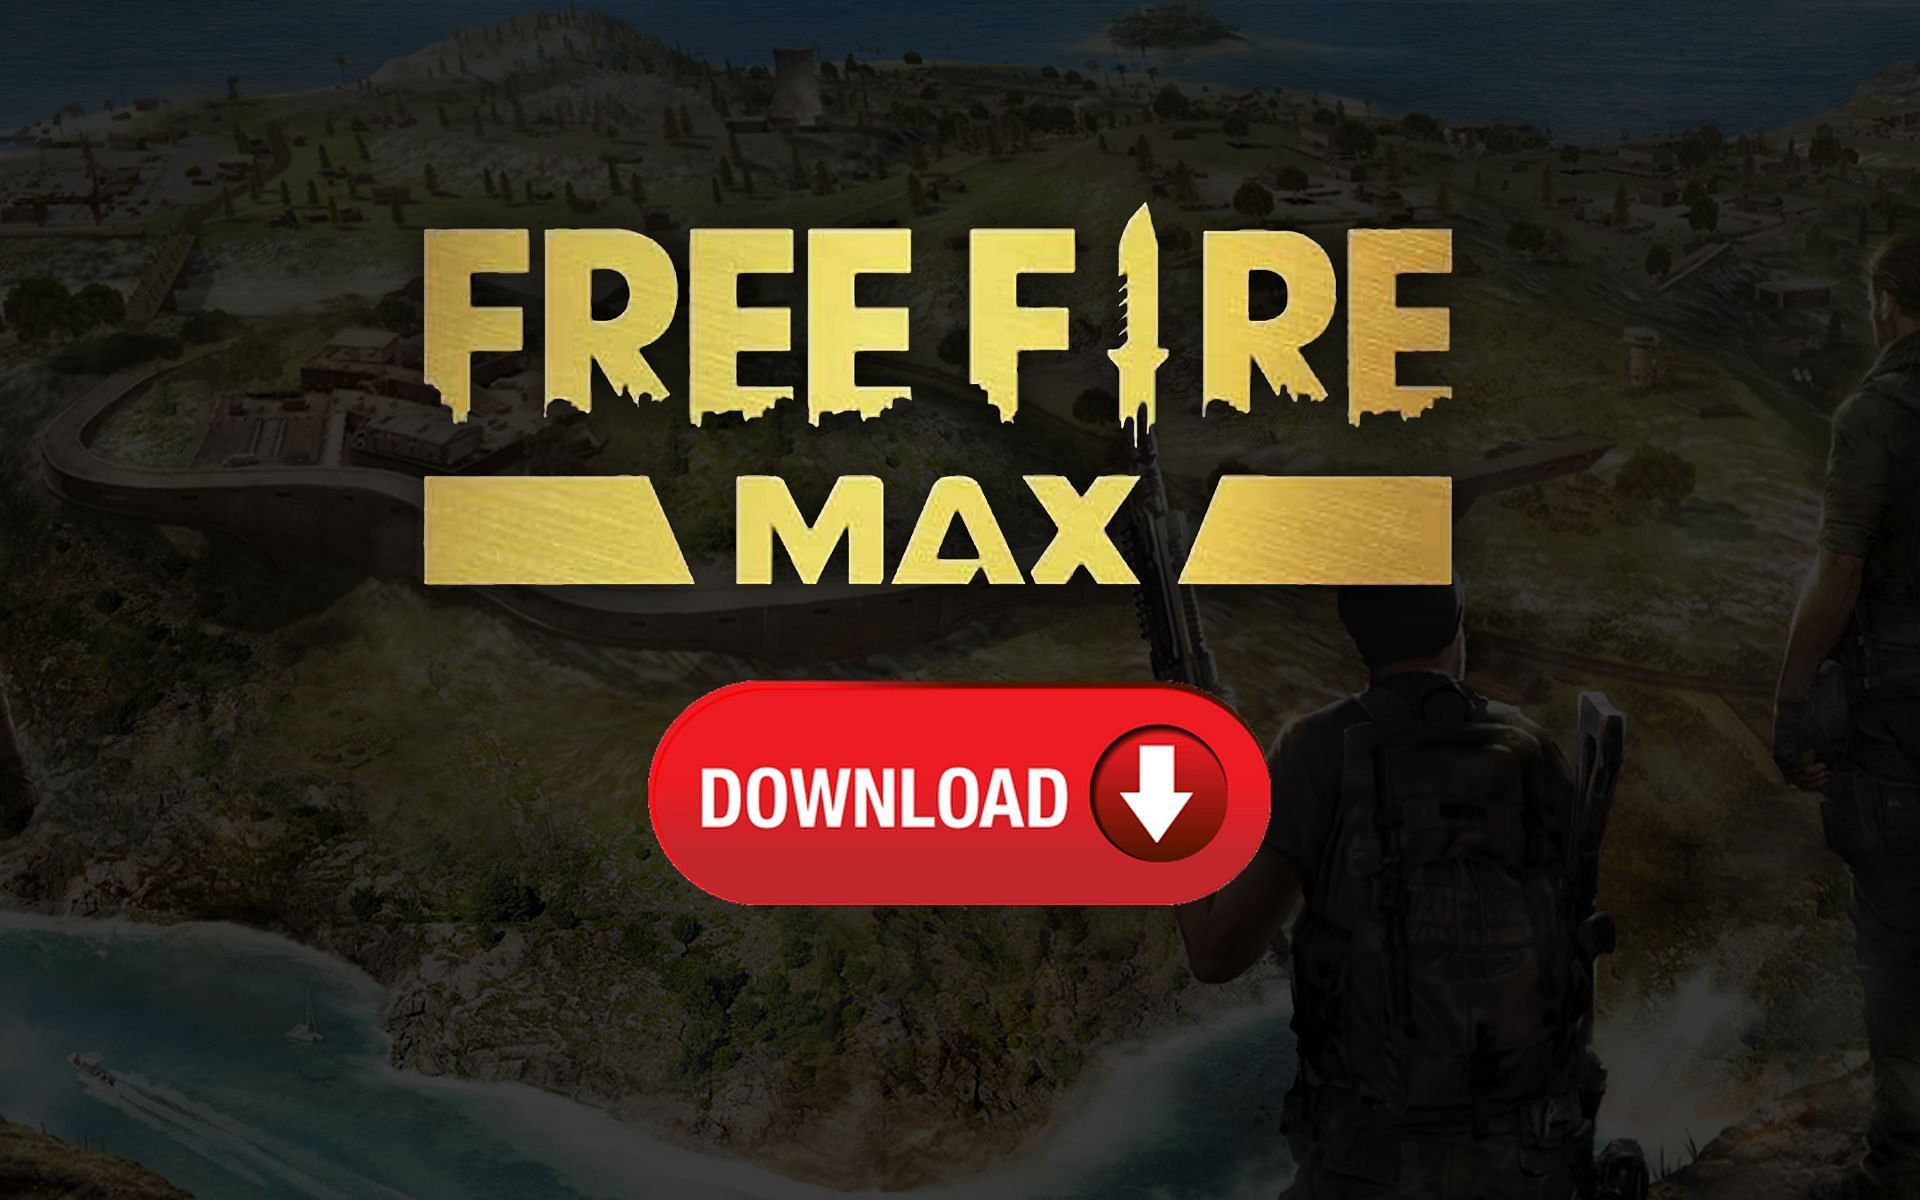 Download Mex Lucky Apk Guide on PC (Emulator) - LDPlayer